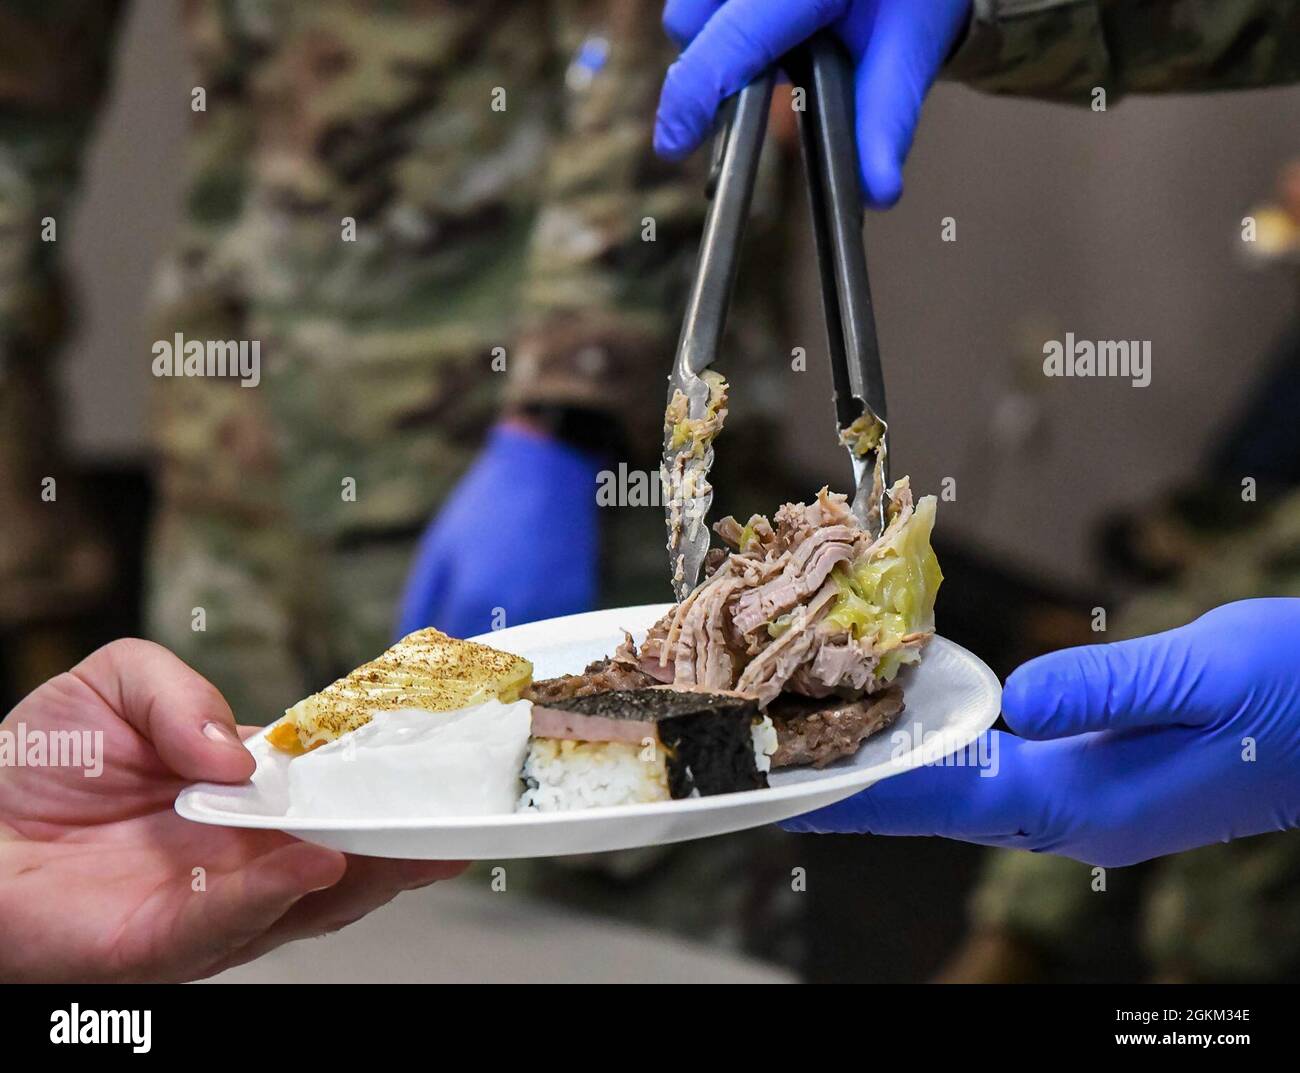 Hawaiian Kalua pork is served during the Asian American and Pacific Islander Heritage Month Expo at Dover Air Force Base, Delaware, May 21, 2021. Kalua pork is traditionally cooked in an Imu, an underground oven, with tropical leaves placed on top to steam cook the pork. Stock Photo